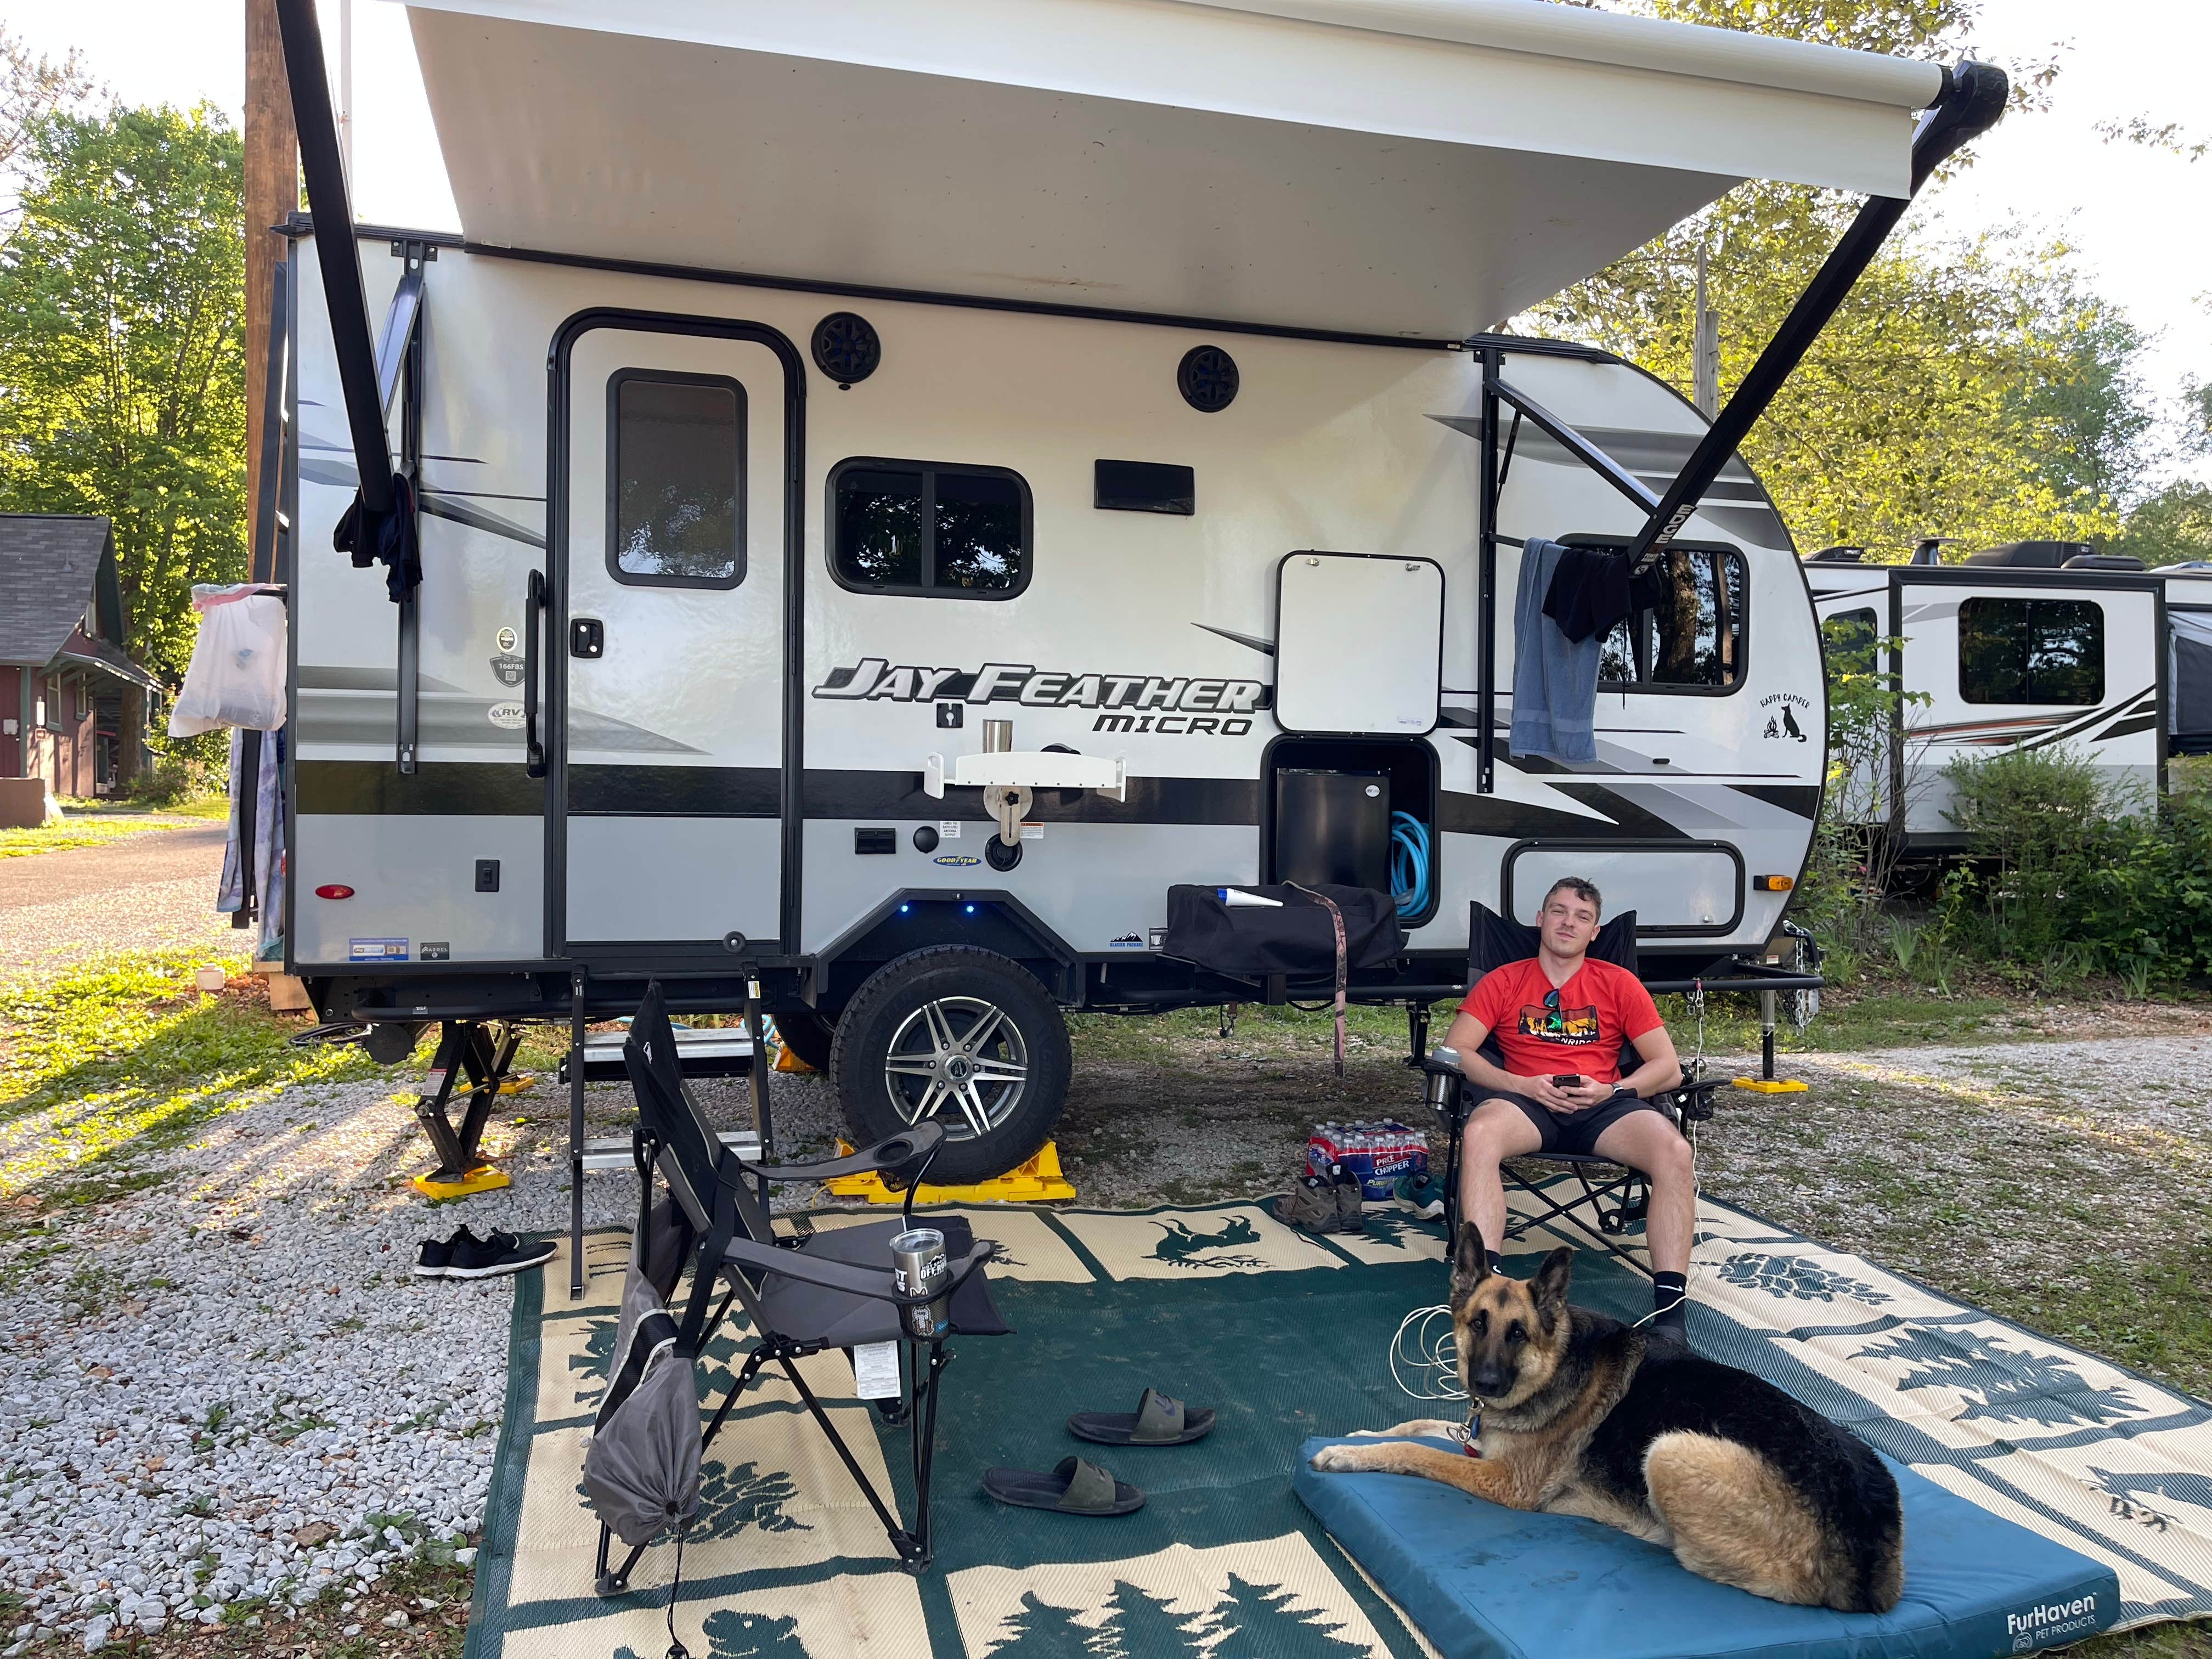 Camper submitted image from Dogwood Springs Campground - 5